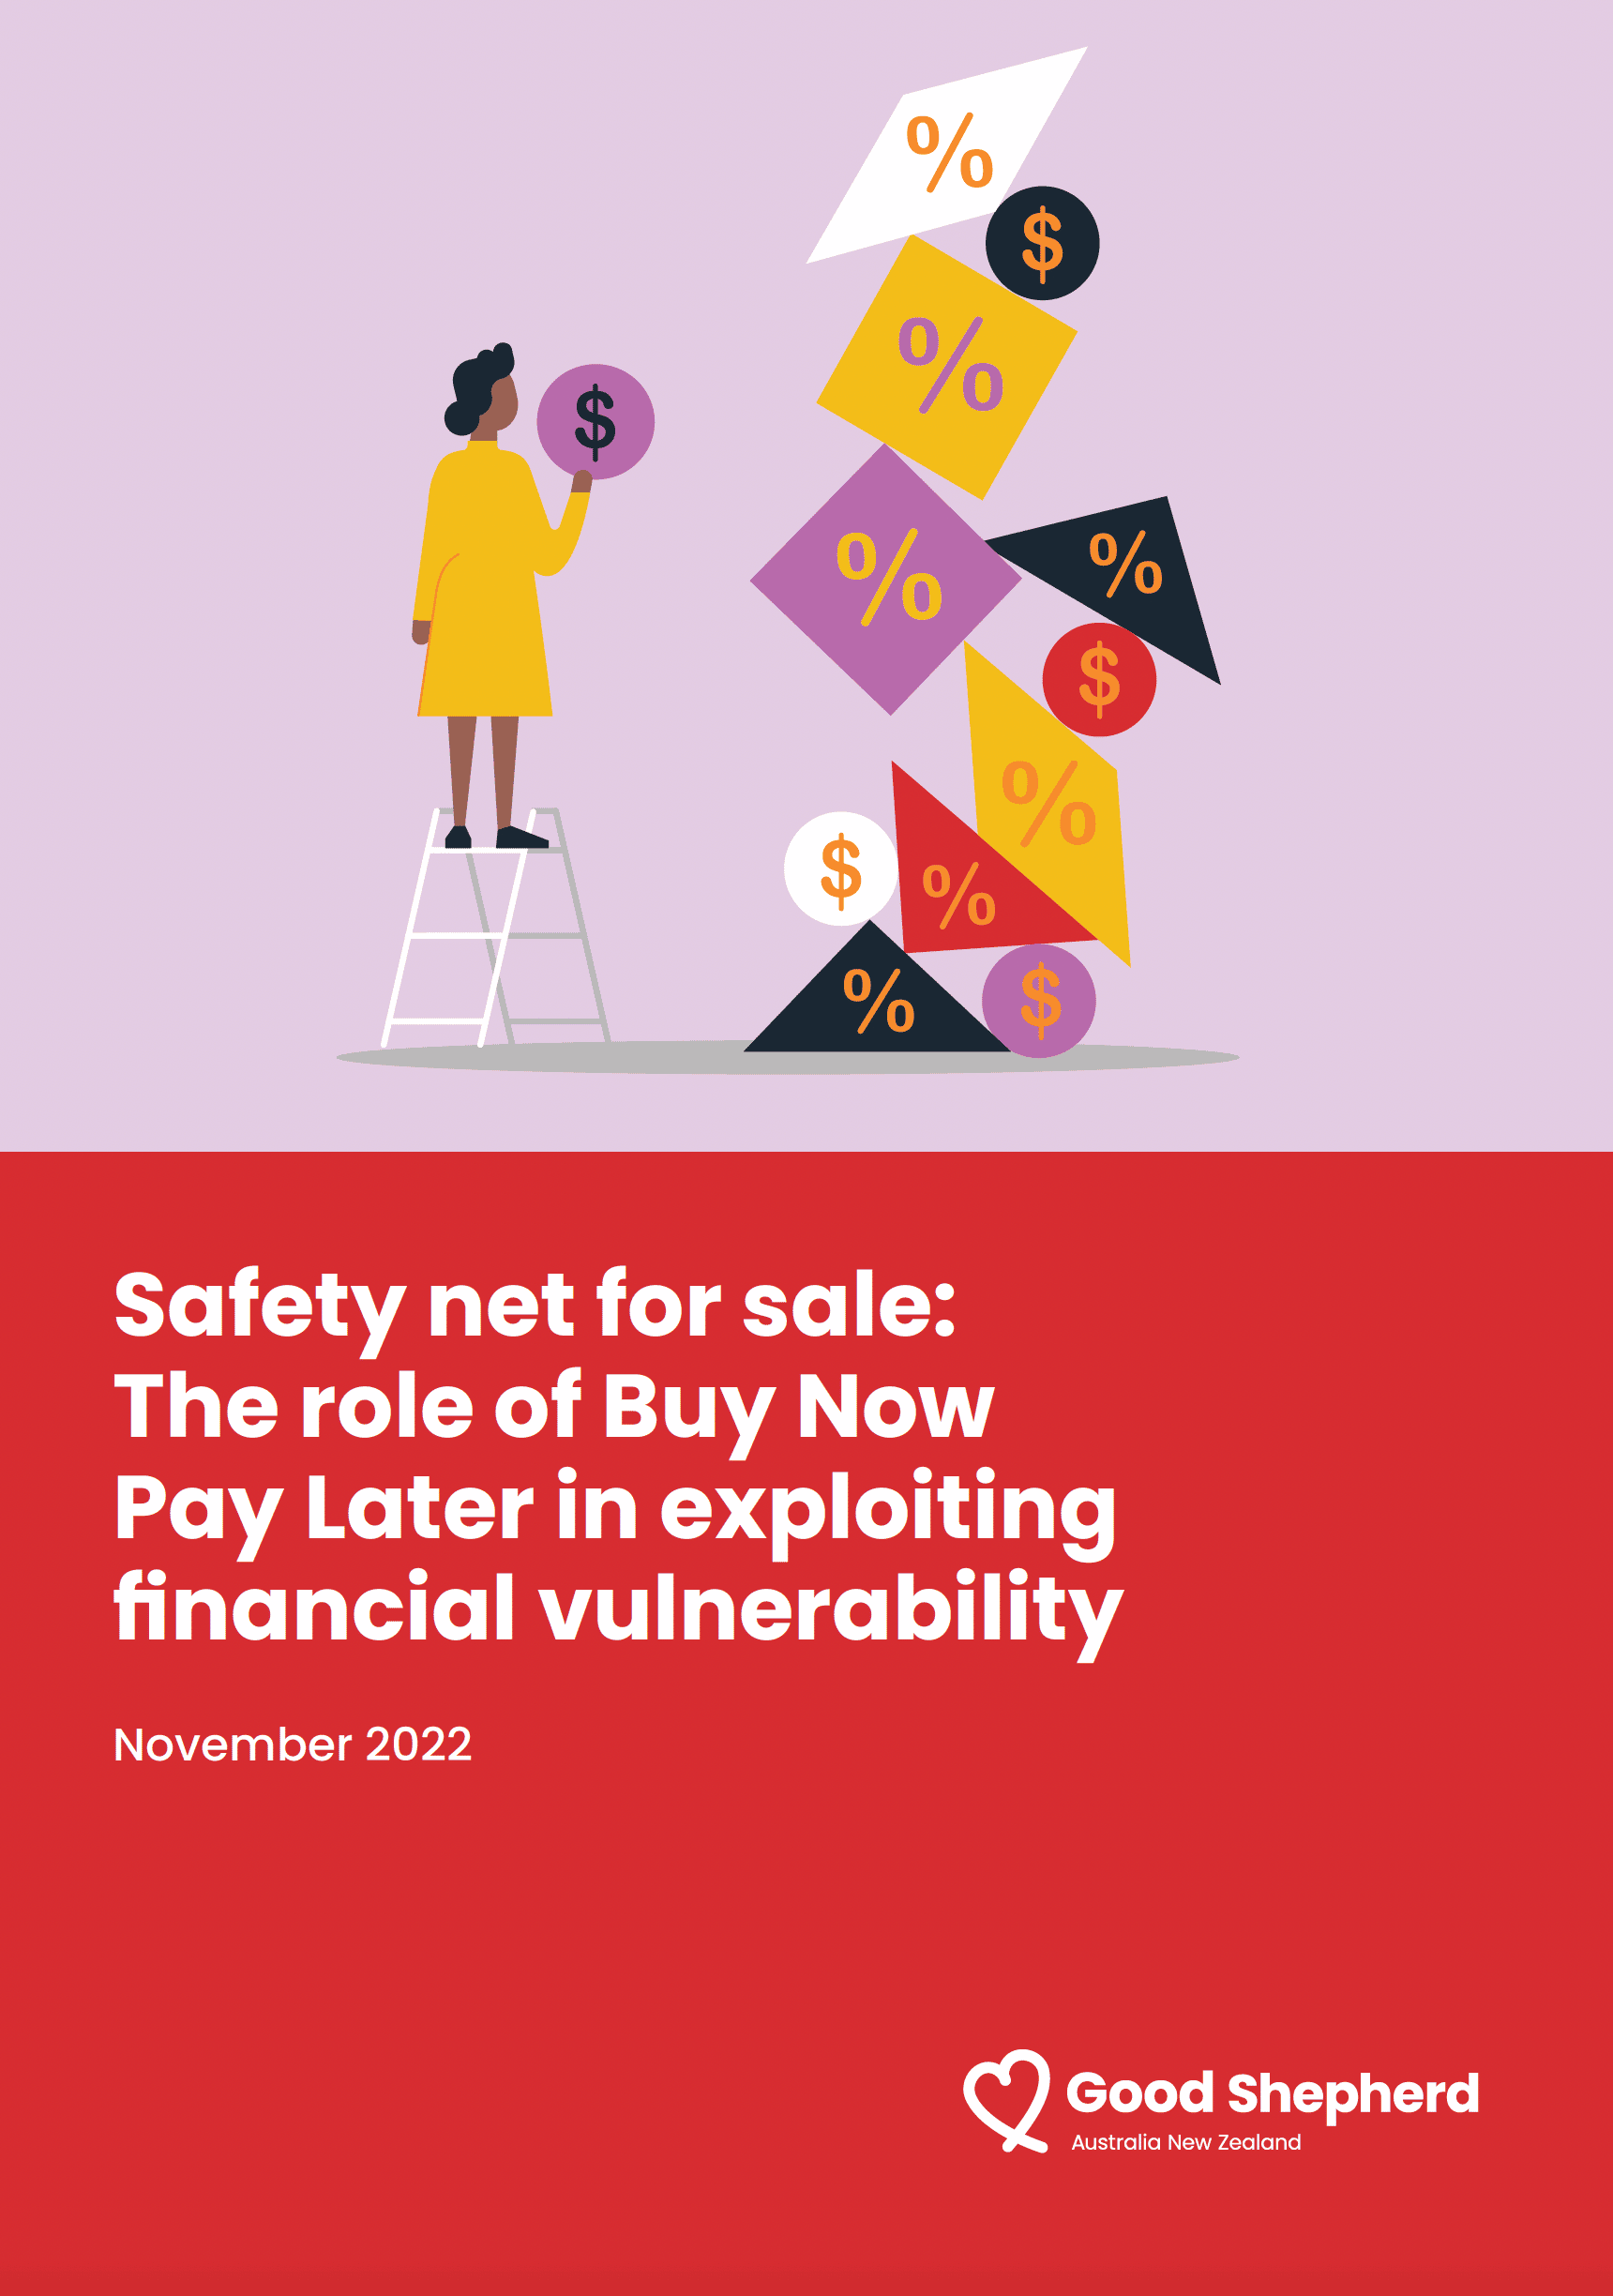 Safety net for sale: The role of Buy Now Pay Later in exploiting